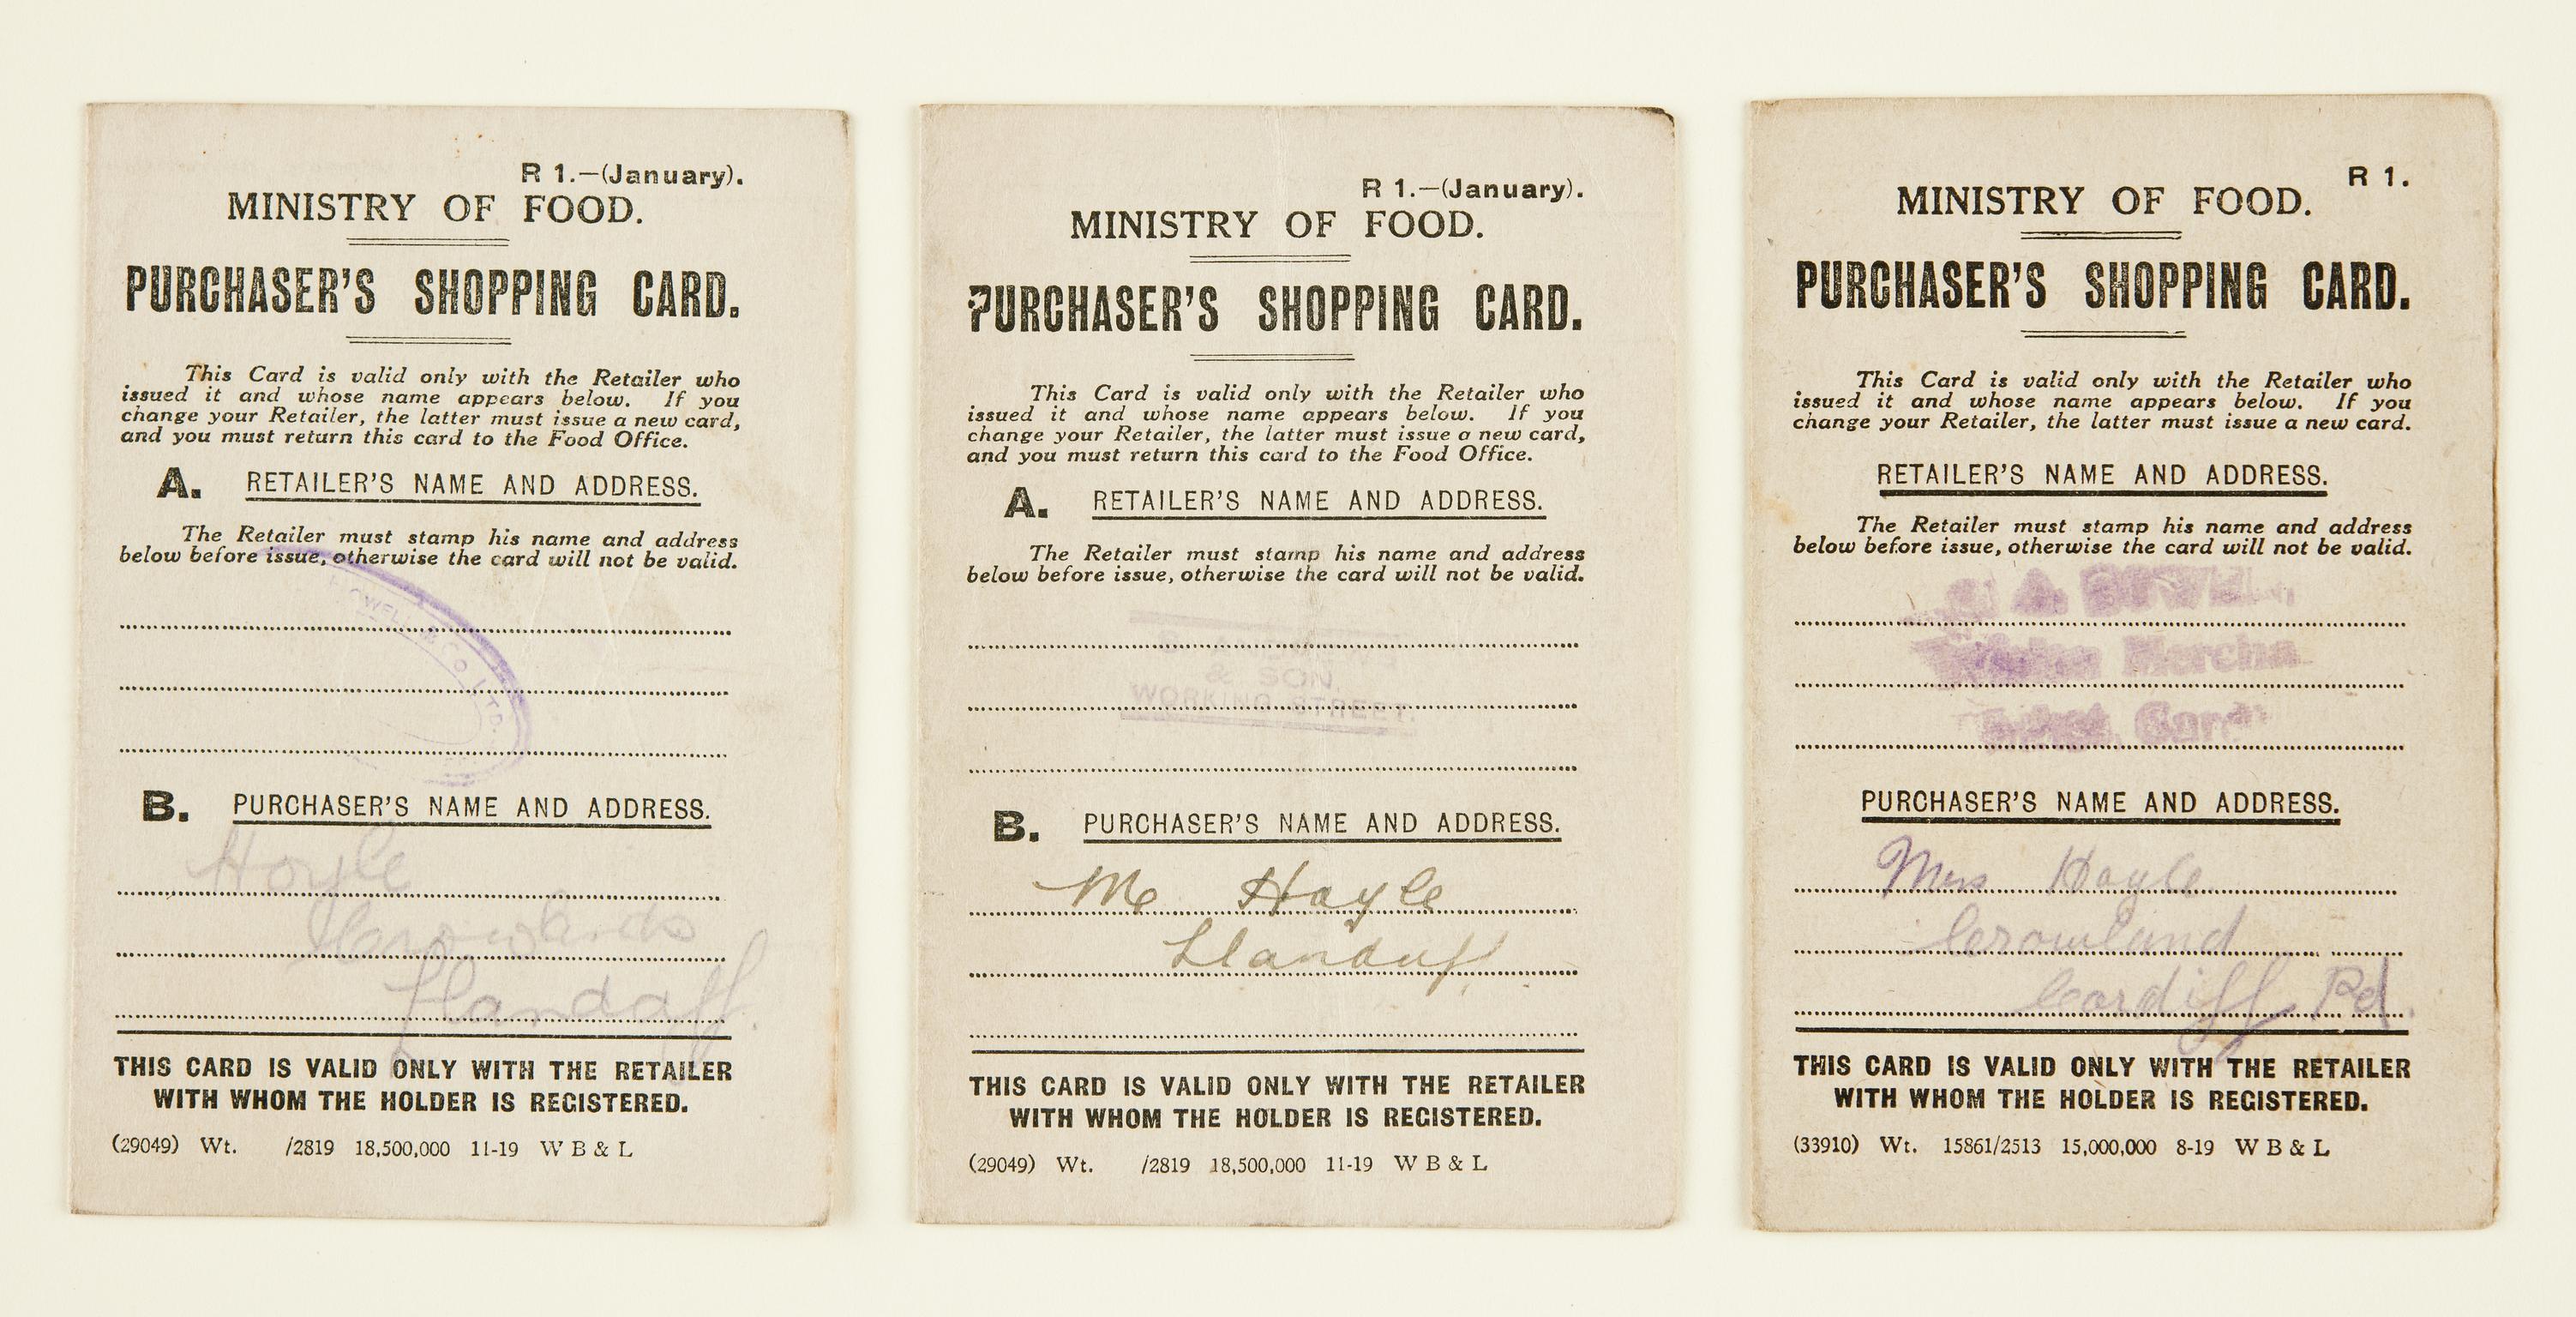 The Purchaser's Shopping Card